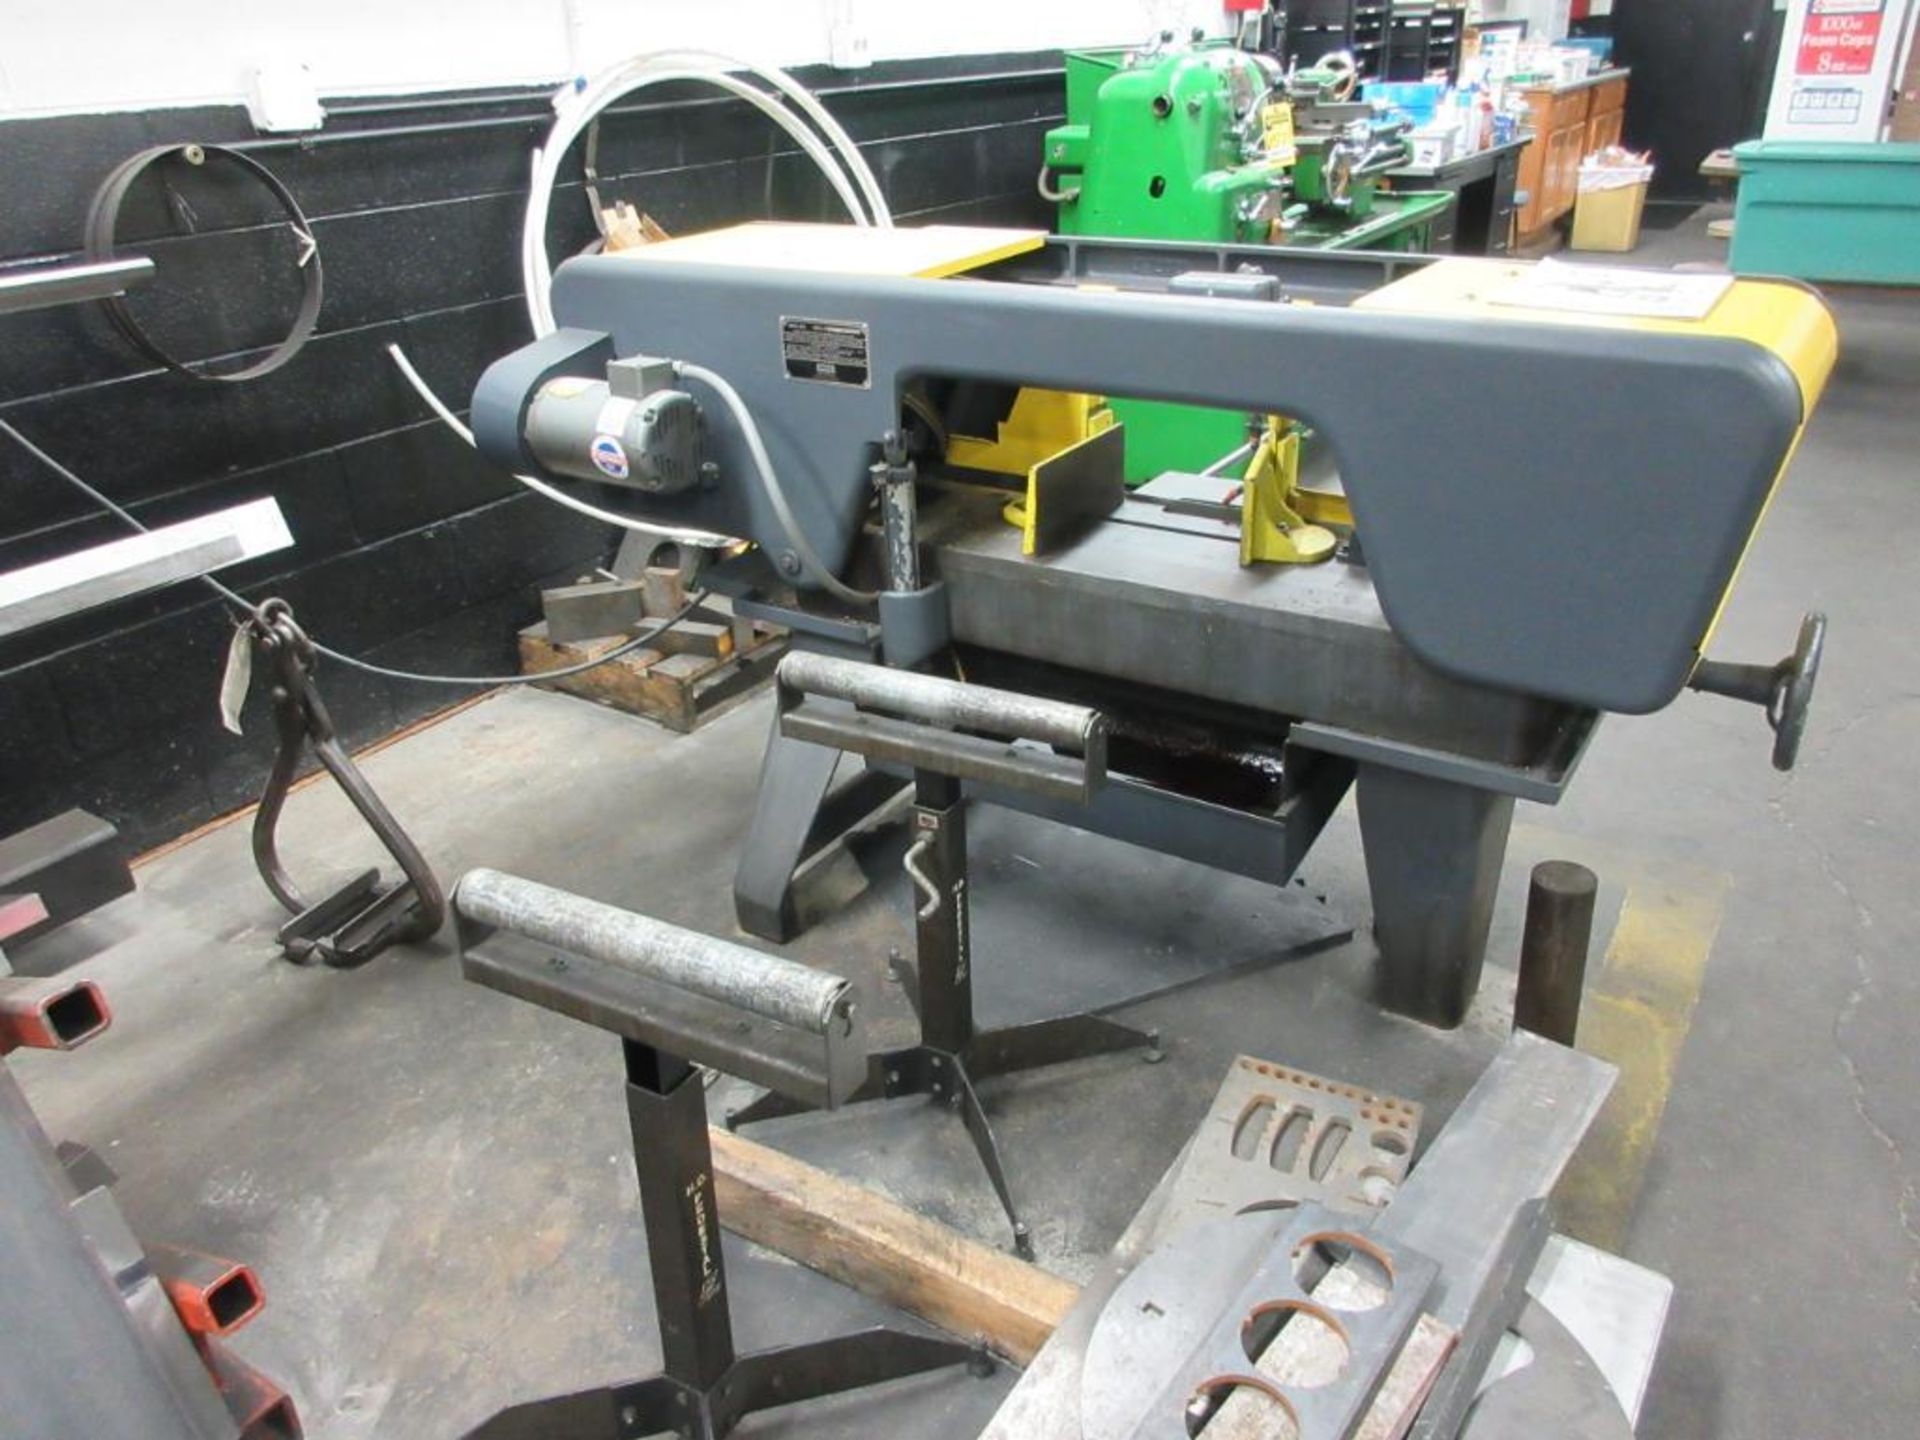 DAXE-JOHNSON JH-10 HORIZONTAL BAND SAW, HYDRAULIC HEAD FEED, COOLANT SYSTEM, S/N 196142, (2) - Image 2 of 3